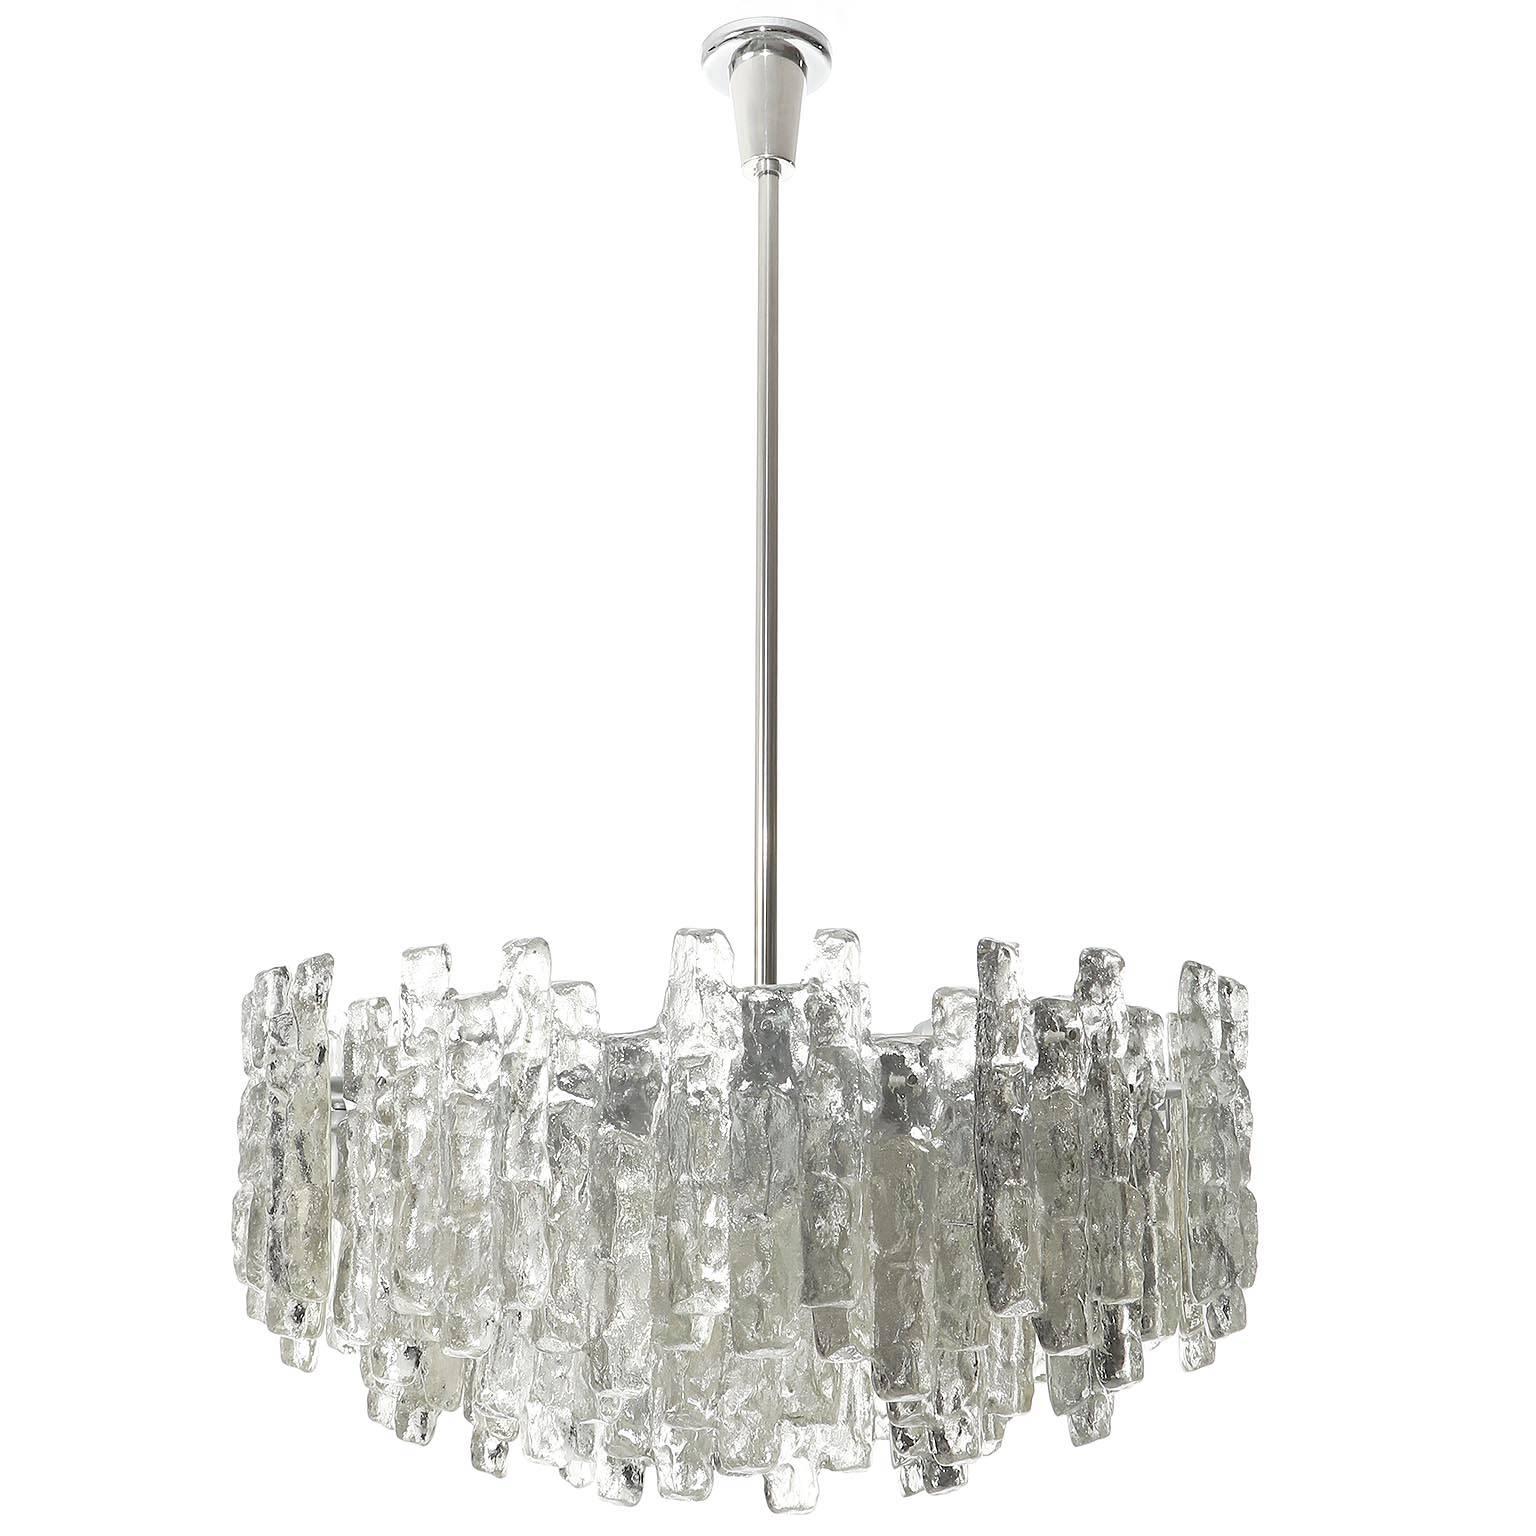 One of two large light fixtures model 'SORIA' by Kalmar, Austria, manufactured in Mid-Century, circa 1970 (late 1960s - early 1970s). These chandeliers are the largest version of this series. A set of four of them is absolutely rare.
A silver